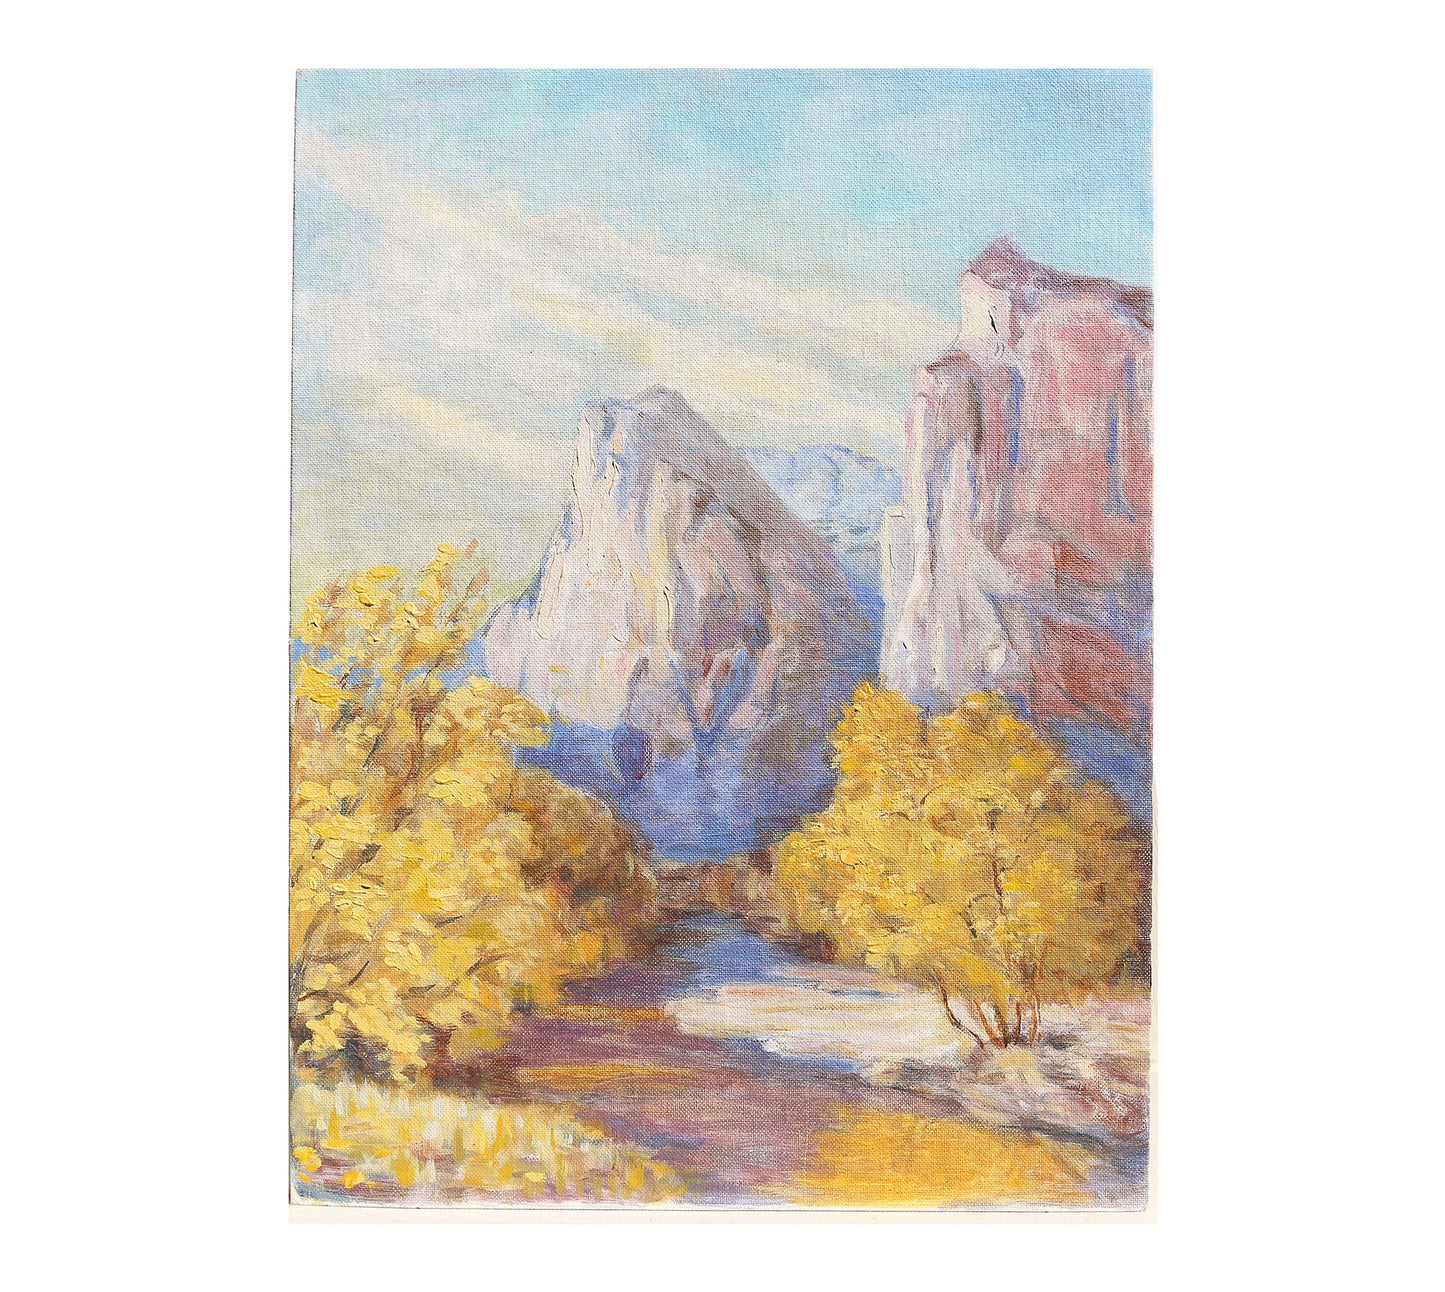 Oil Painting Landscape Treescape on Canvasboard "Connecticut Rock Formations with Autumn Fall Trees" Artist Jule Melbardis 1950s